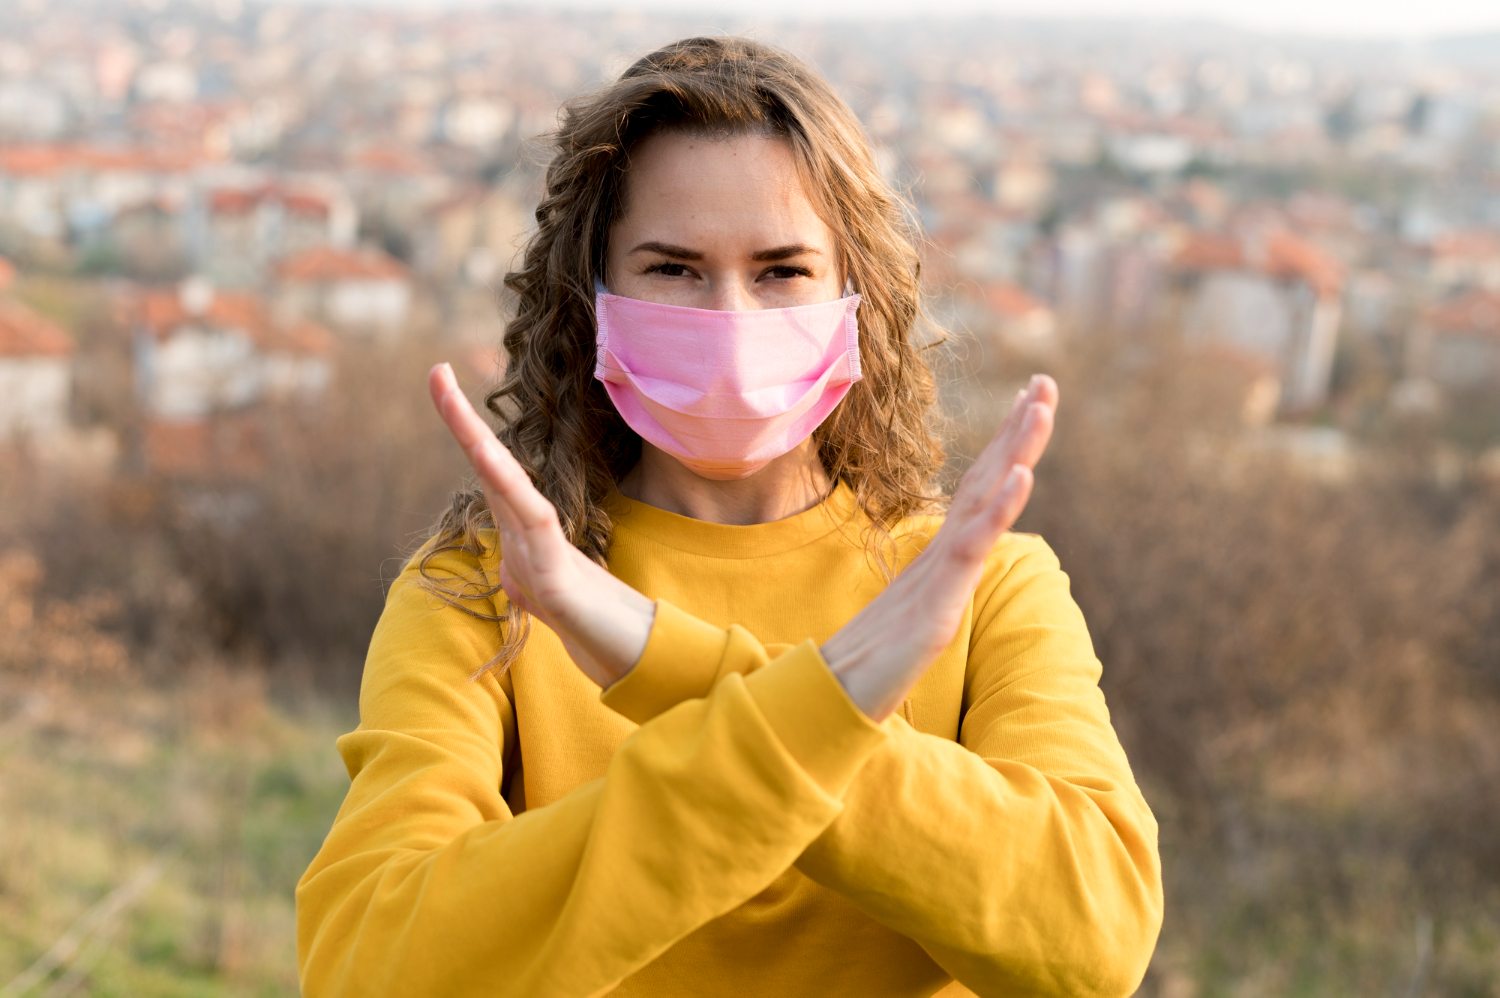 Protect your lungs from air pollution